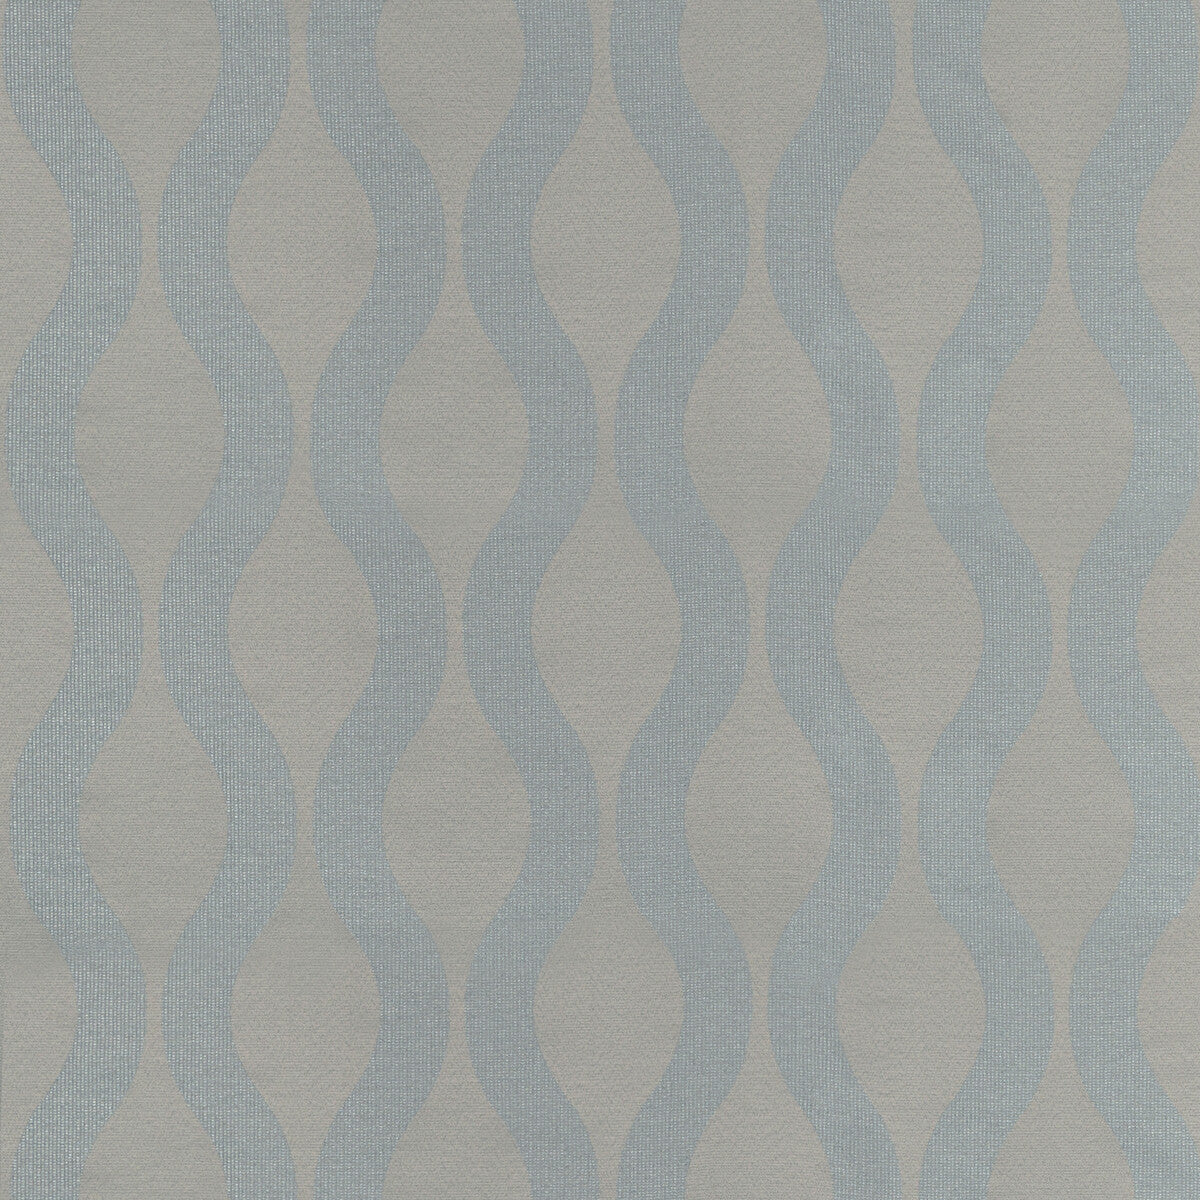 Nellie fabric in sail color - pattern 4660.15.0 - by Kravet Contract